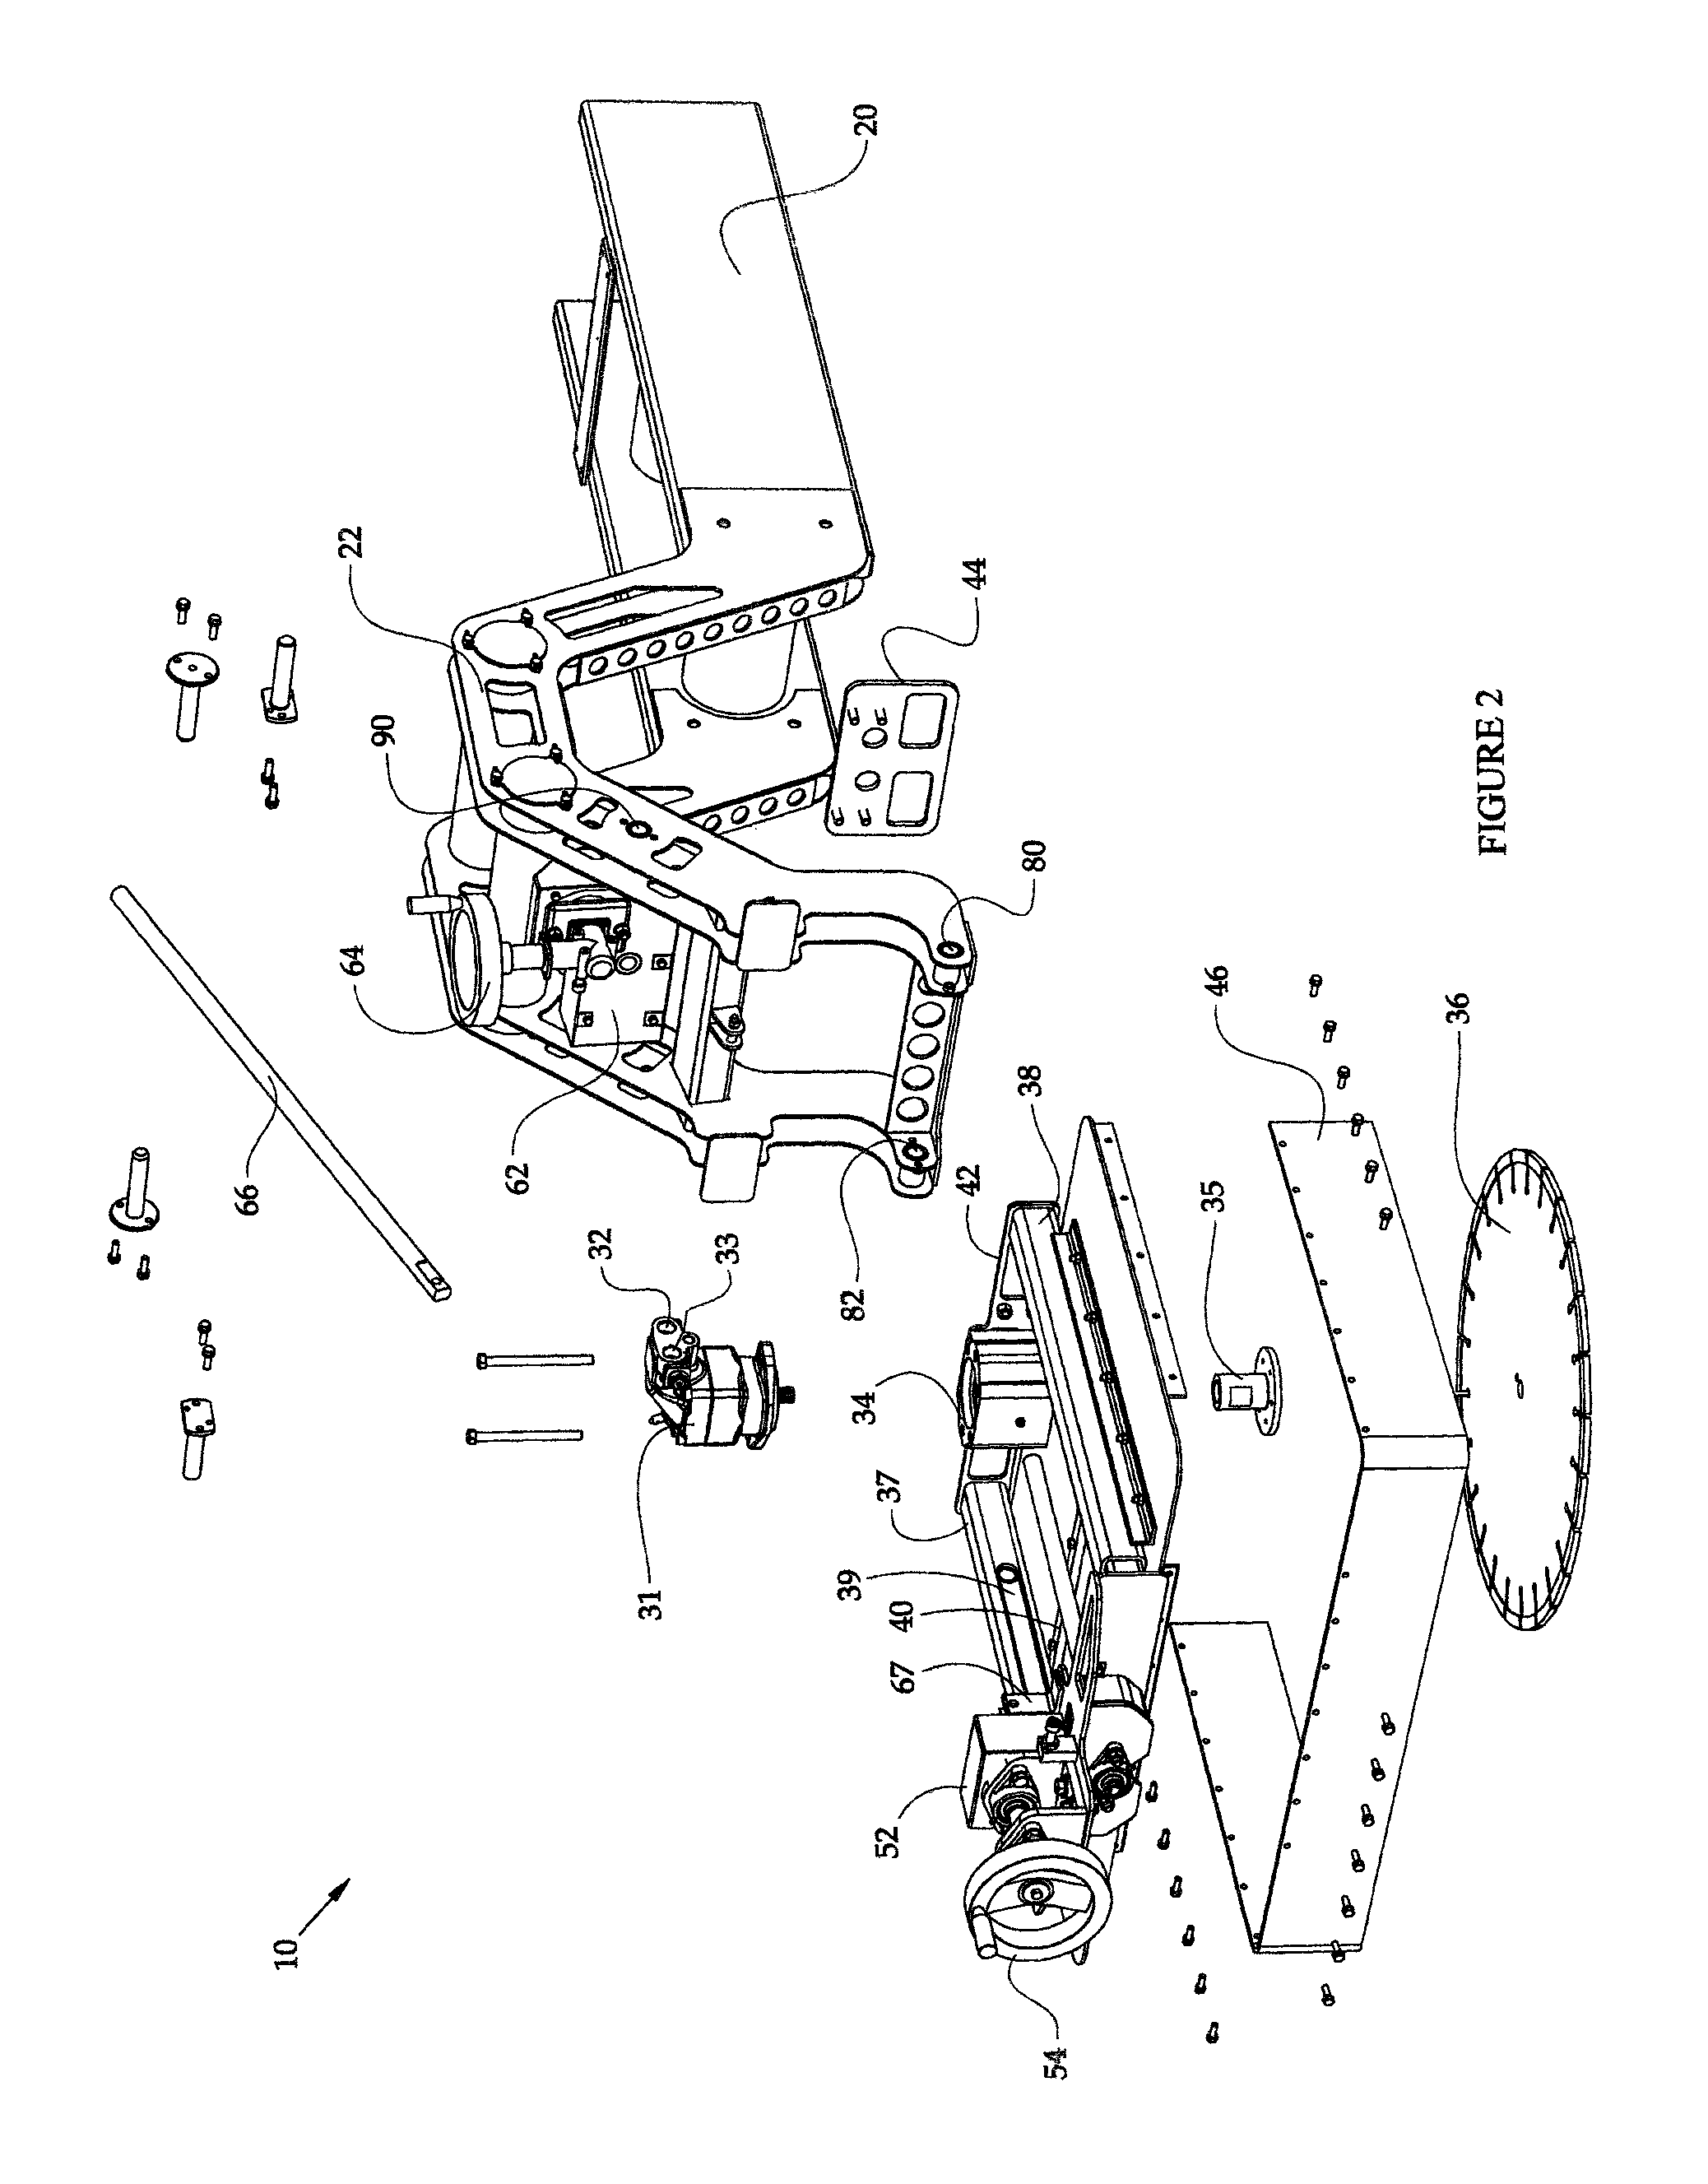 Cutting attachment apparatus and method